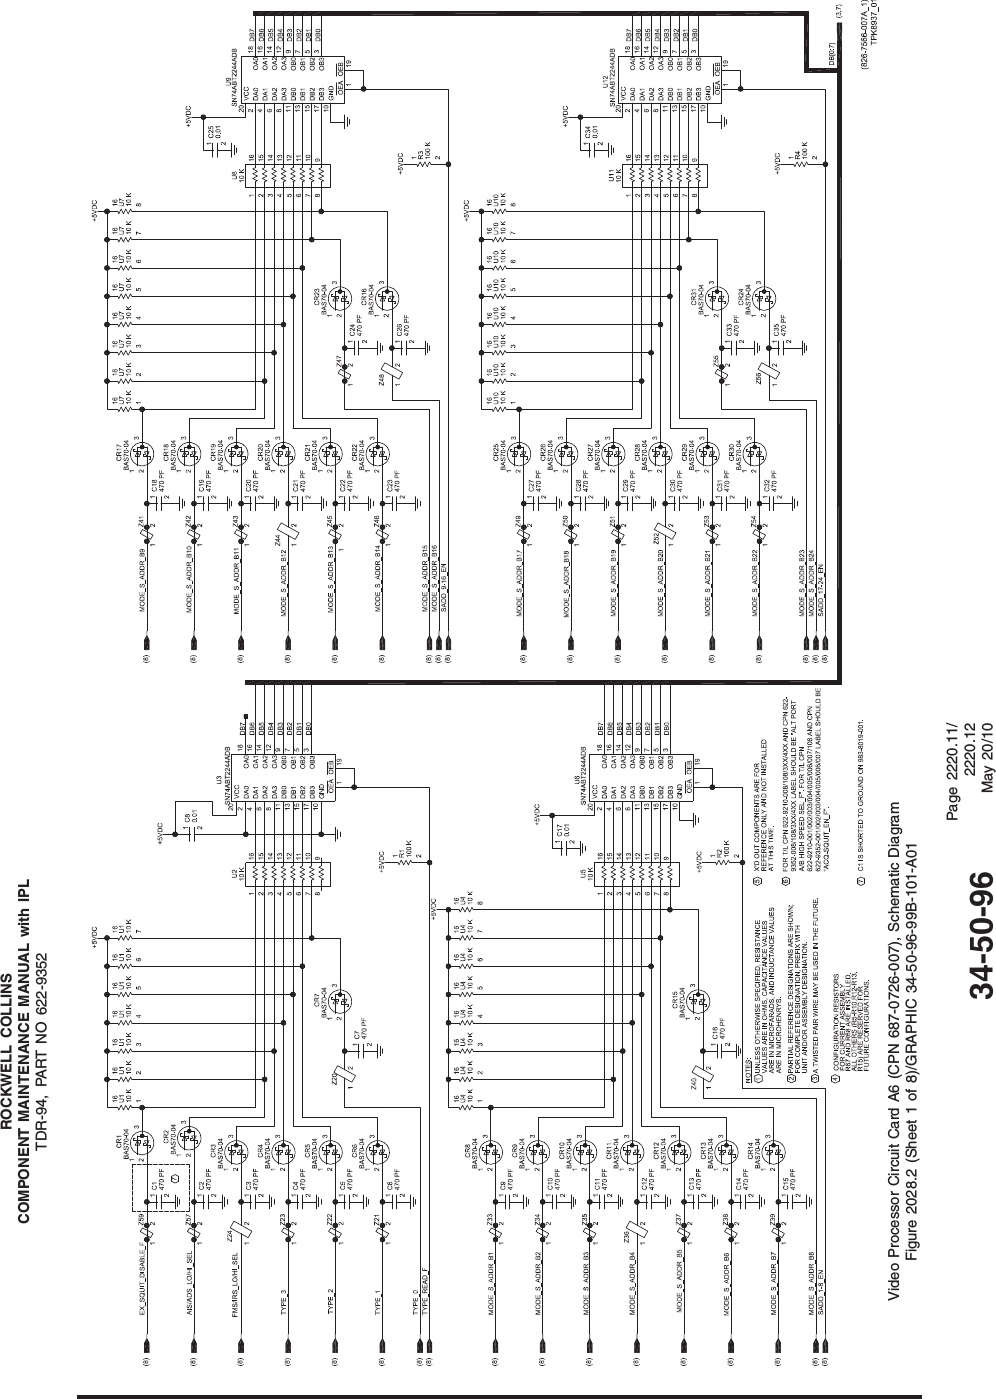 ROCKWELL COLLINSCOMPONENT MAINTENANCE MANUAL with IPLTDR-94, PART NO 622-9352Video Processor Circuit Card A6 (CPN 687-0726-007), Schematic DiagramFigure 2028.2 (Sheet 1 of 8)/GRAPHIC 34-50-96-99B-101-A0134-50-96Page 2220.11/2220.12May 20/10